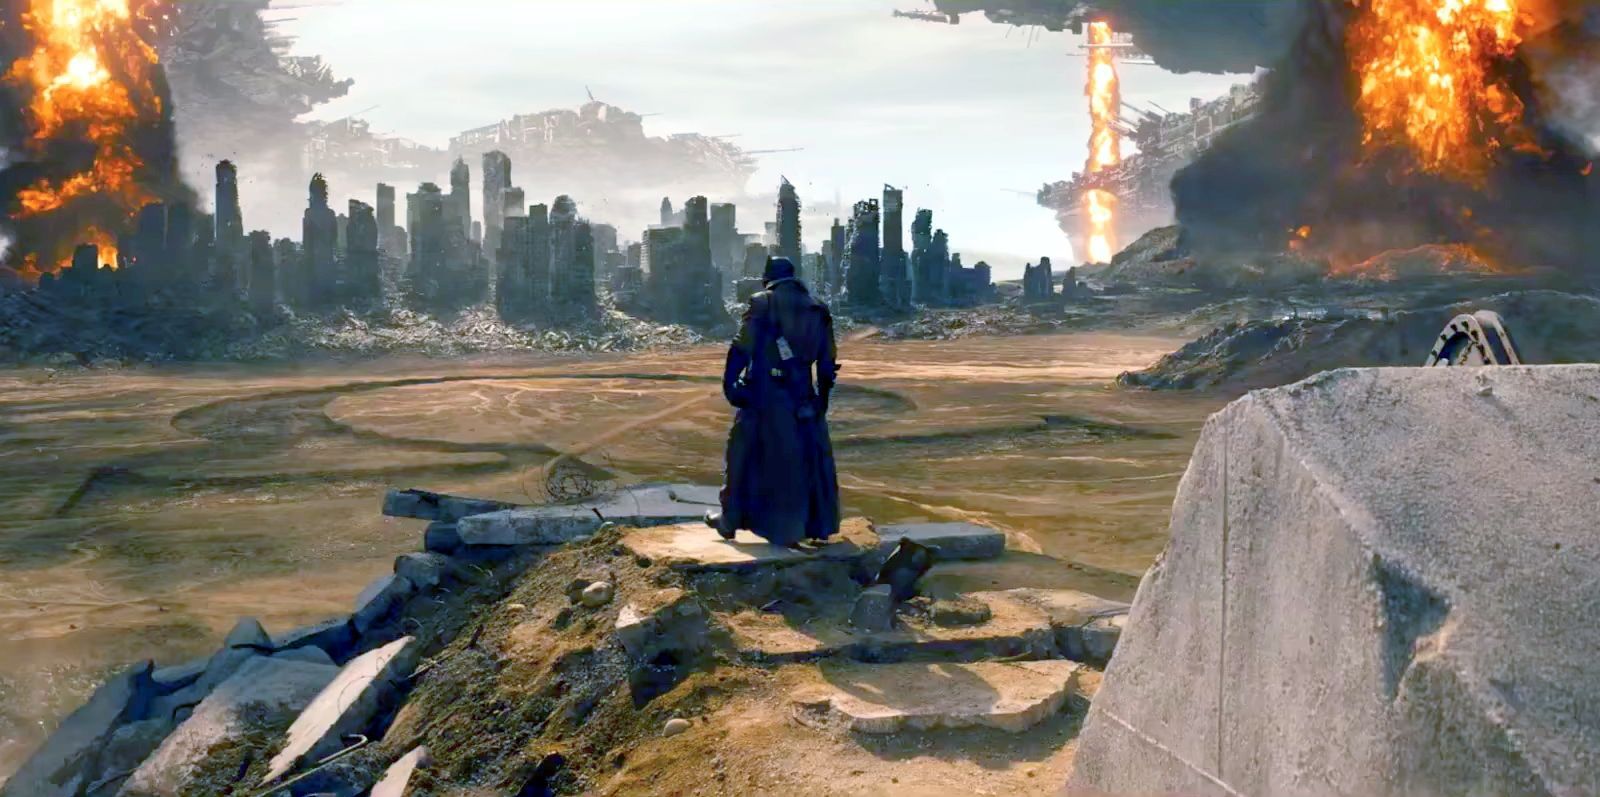 Batman V Superman's Knightmare Sequence is NOT a Dream